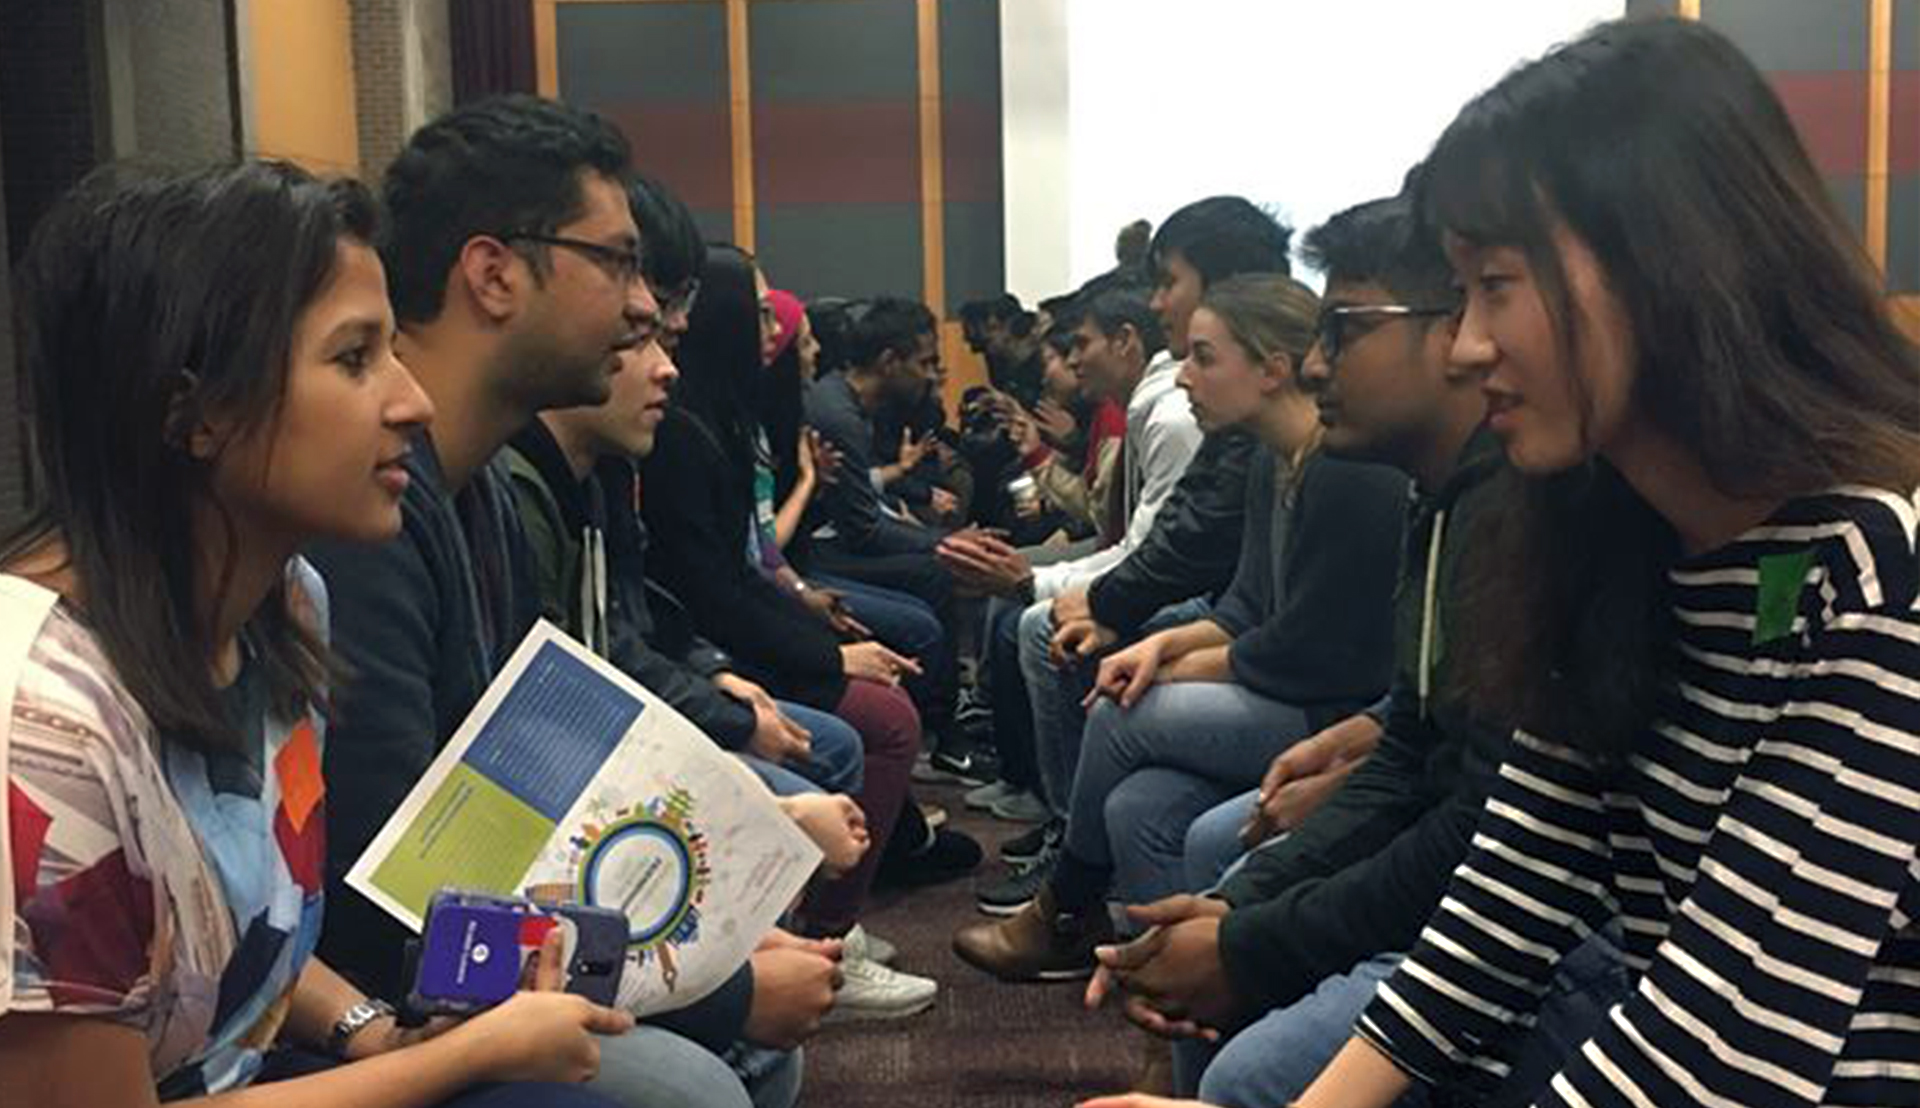 Rutgers Global - International Friendship Program Speed Friending, two long rows of American and international students face each other for five-minute revolving conversations in the College Avenue Student Center